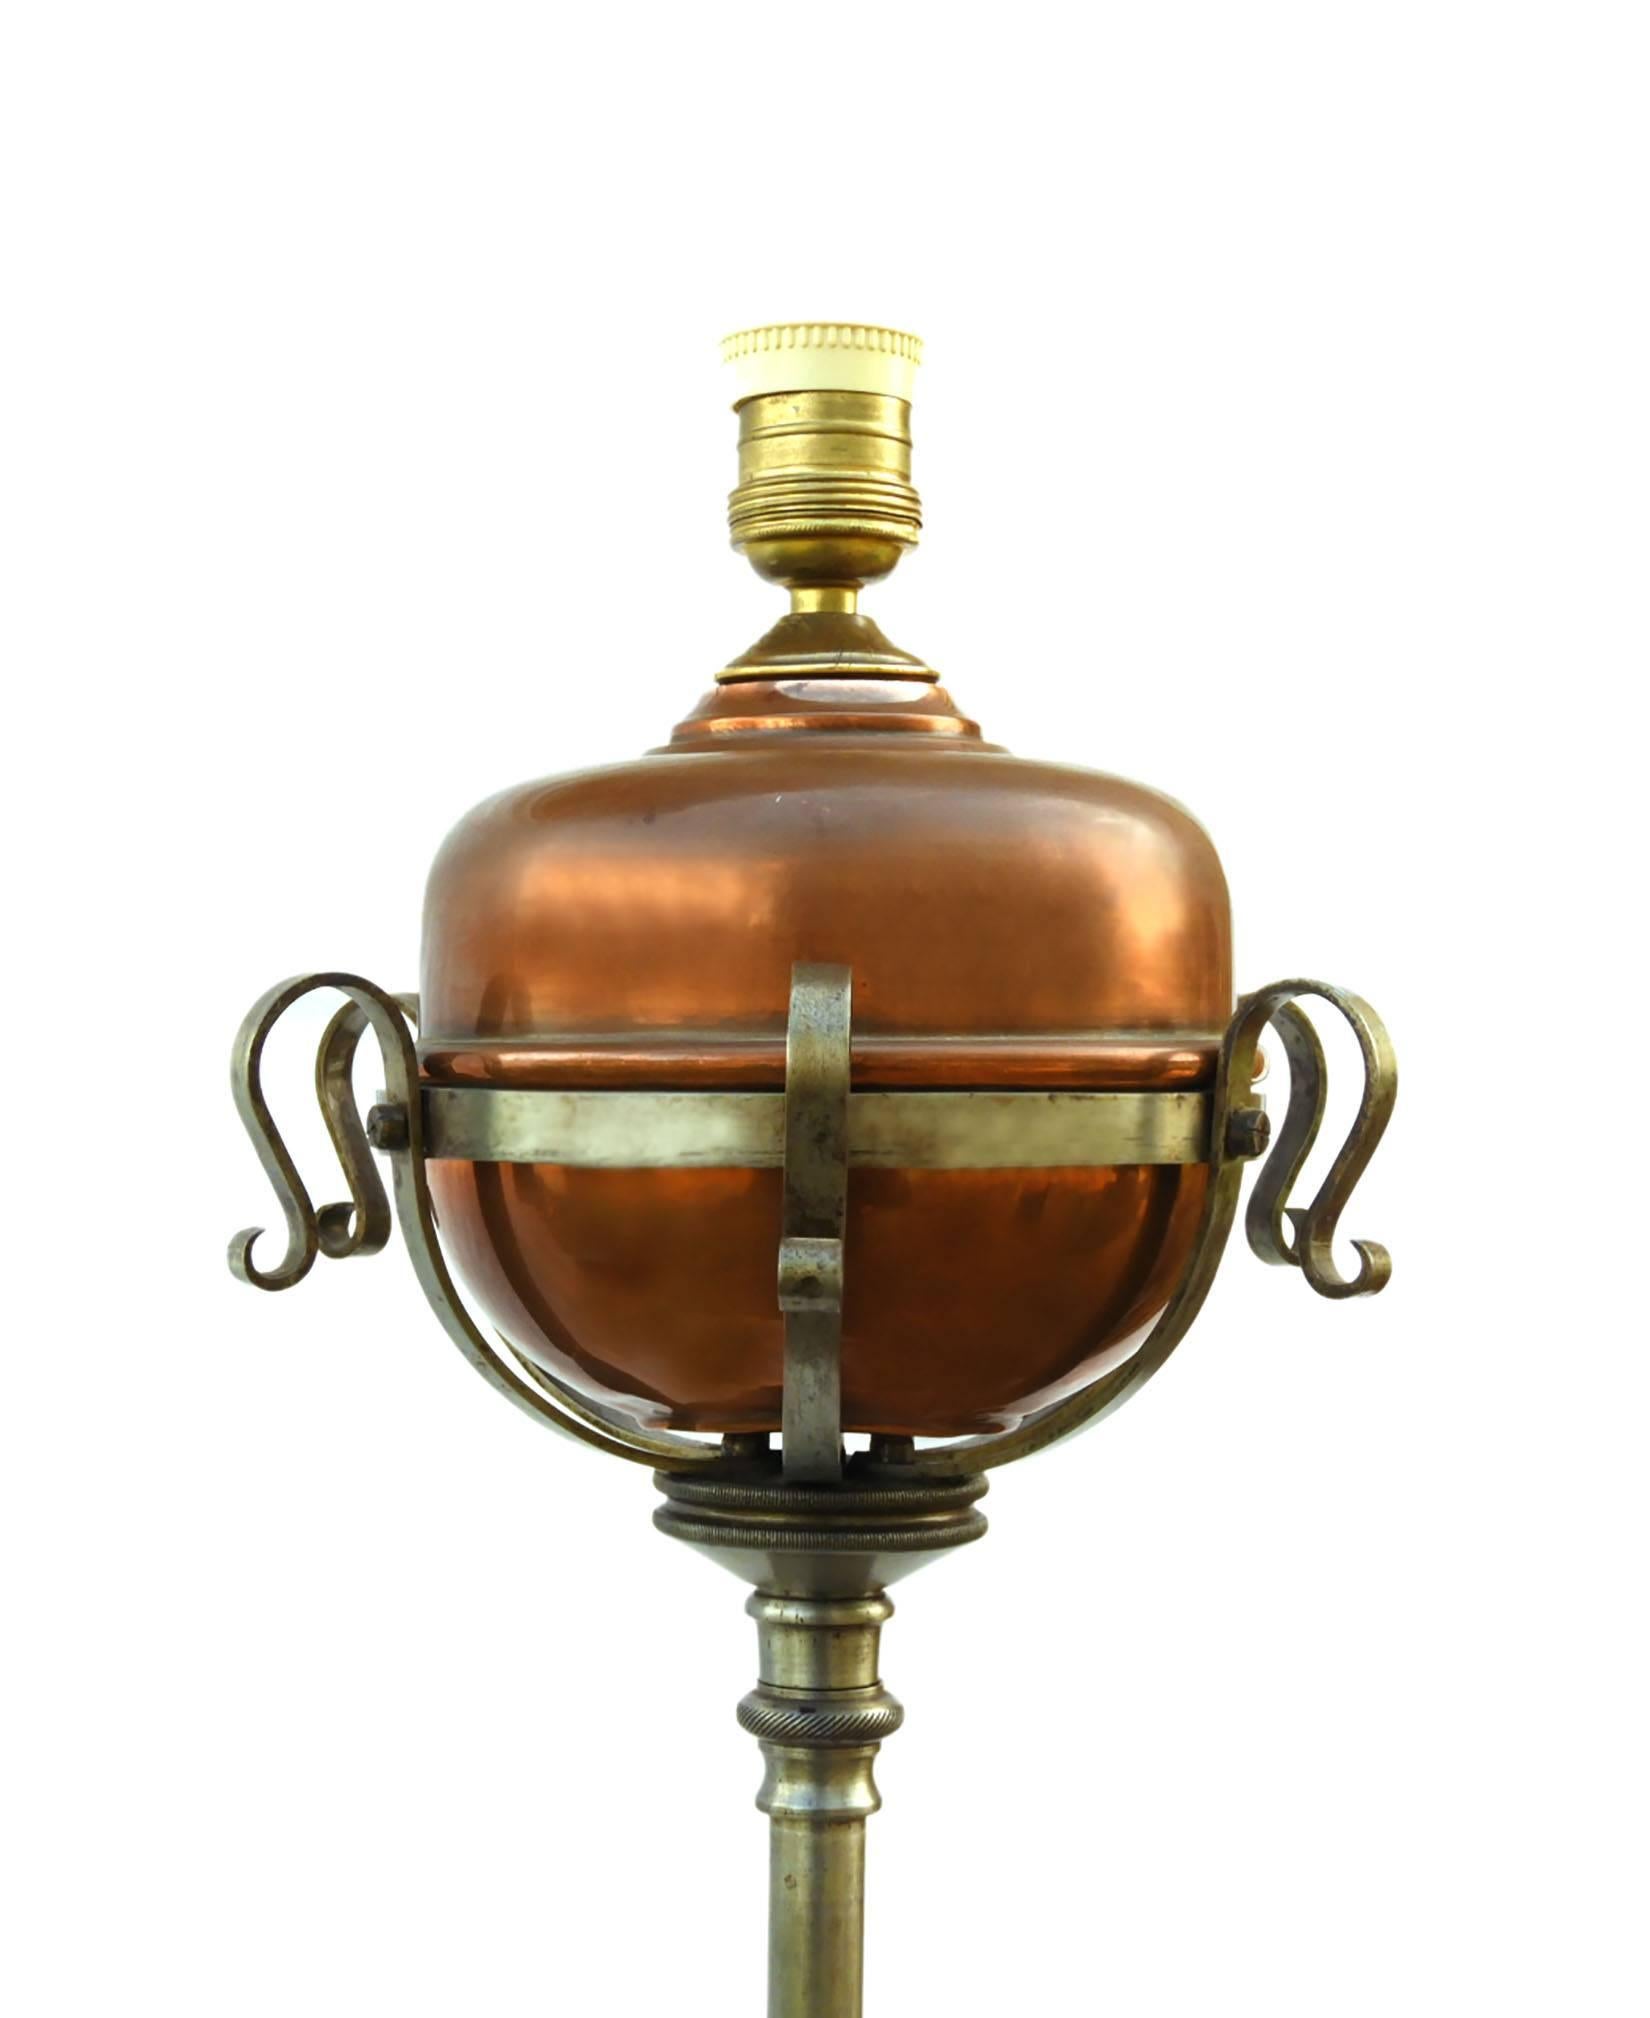 Antique Arts and Crafts floor lamp telescopic French wrought iron
Adjustable standard lamp
Original oil lamp with copper reservoir
It will take a lampshade of your choice or can be used as is
Later converted to electricity
Measures: Height minimum: